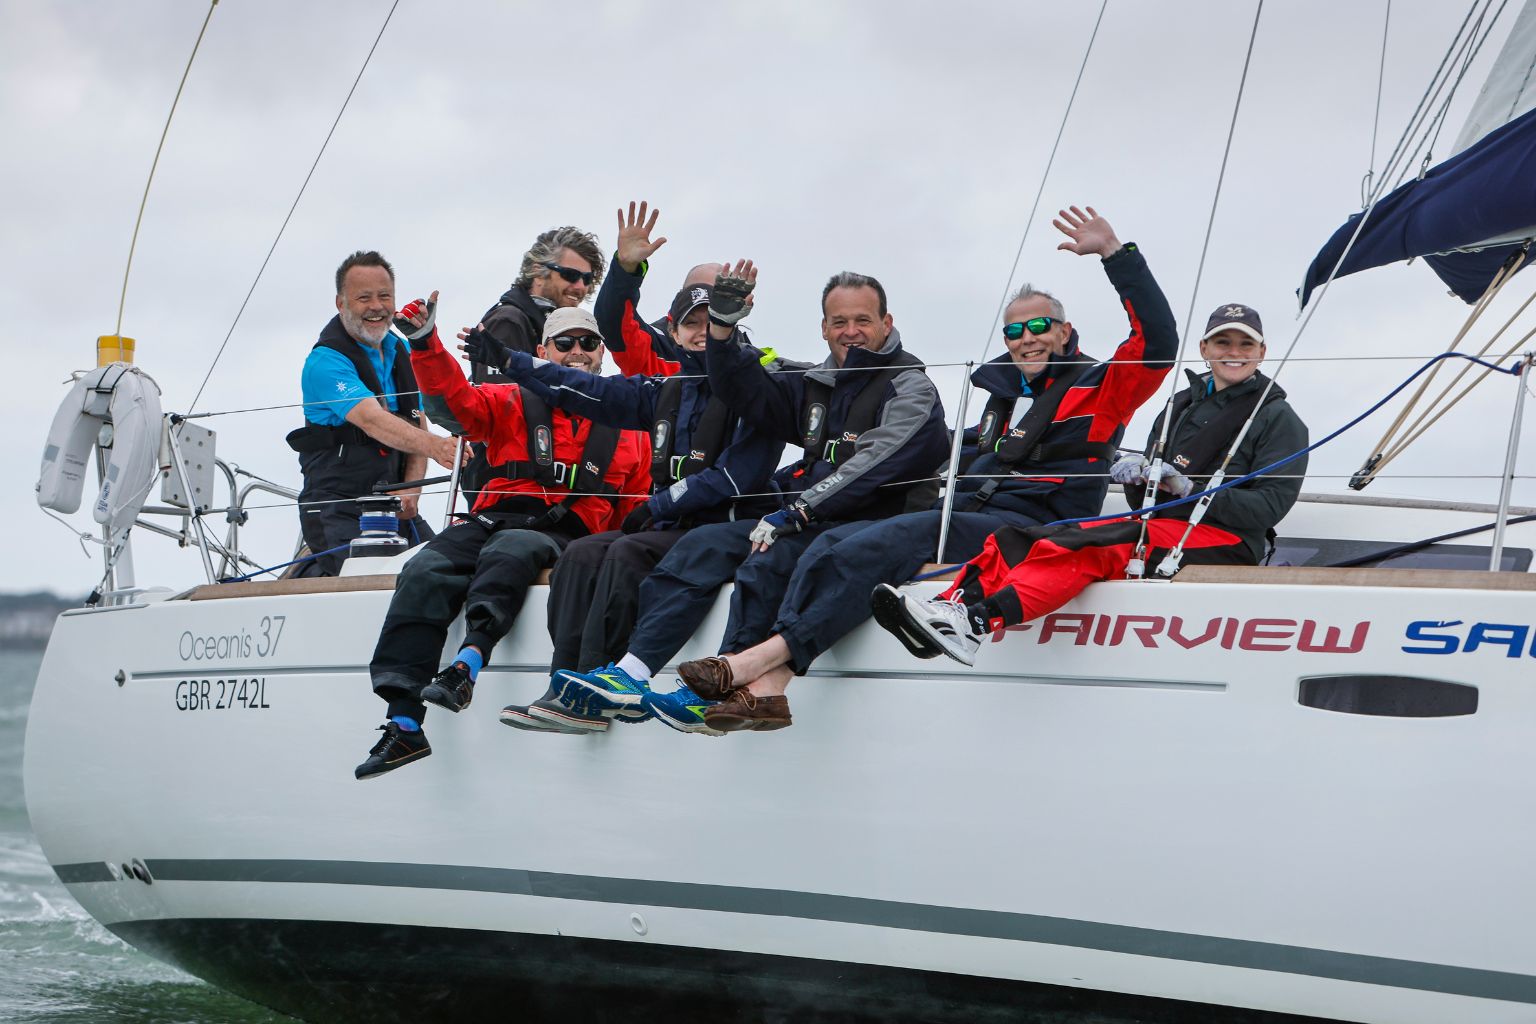 Solent Sailing Events - Which one is right for you?